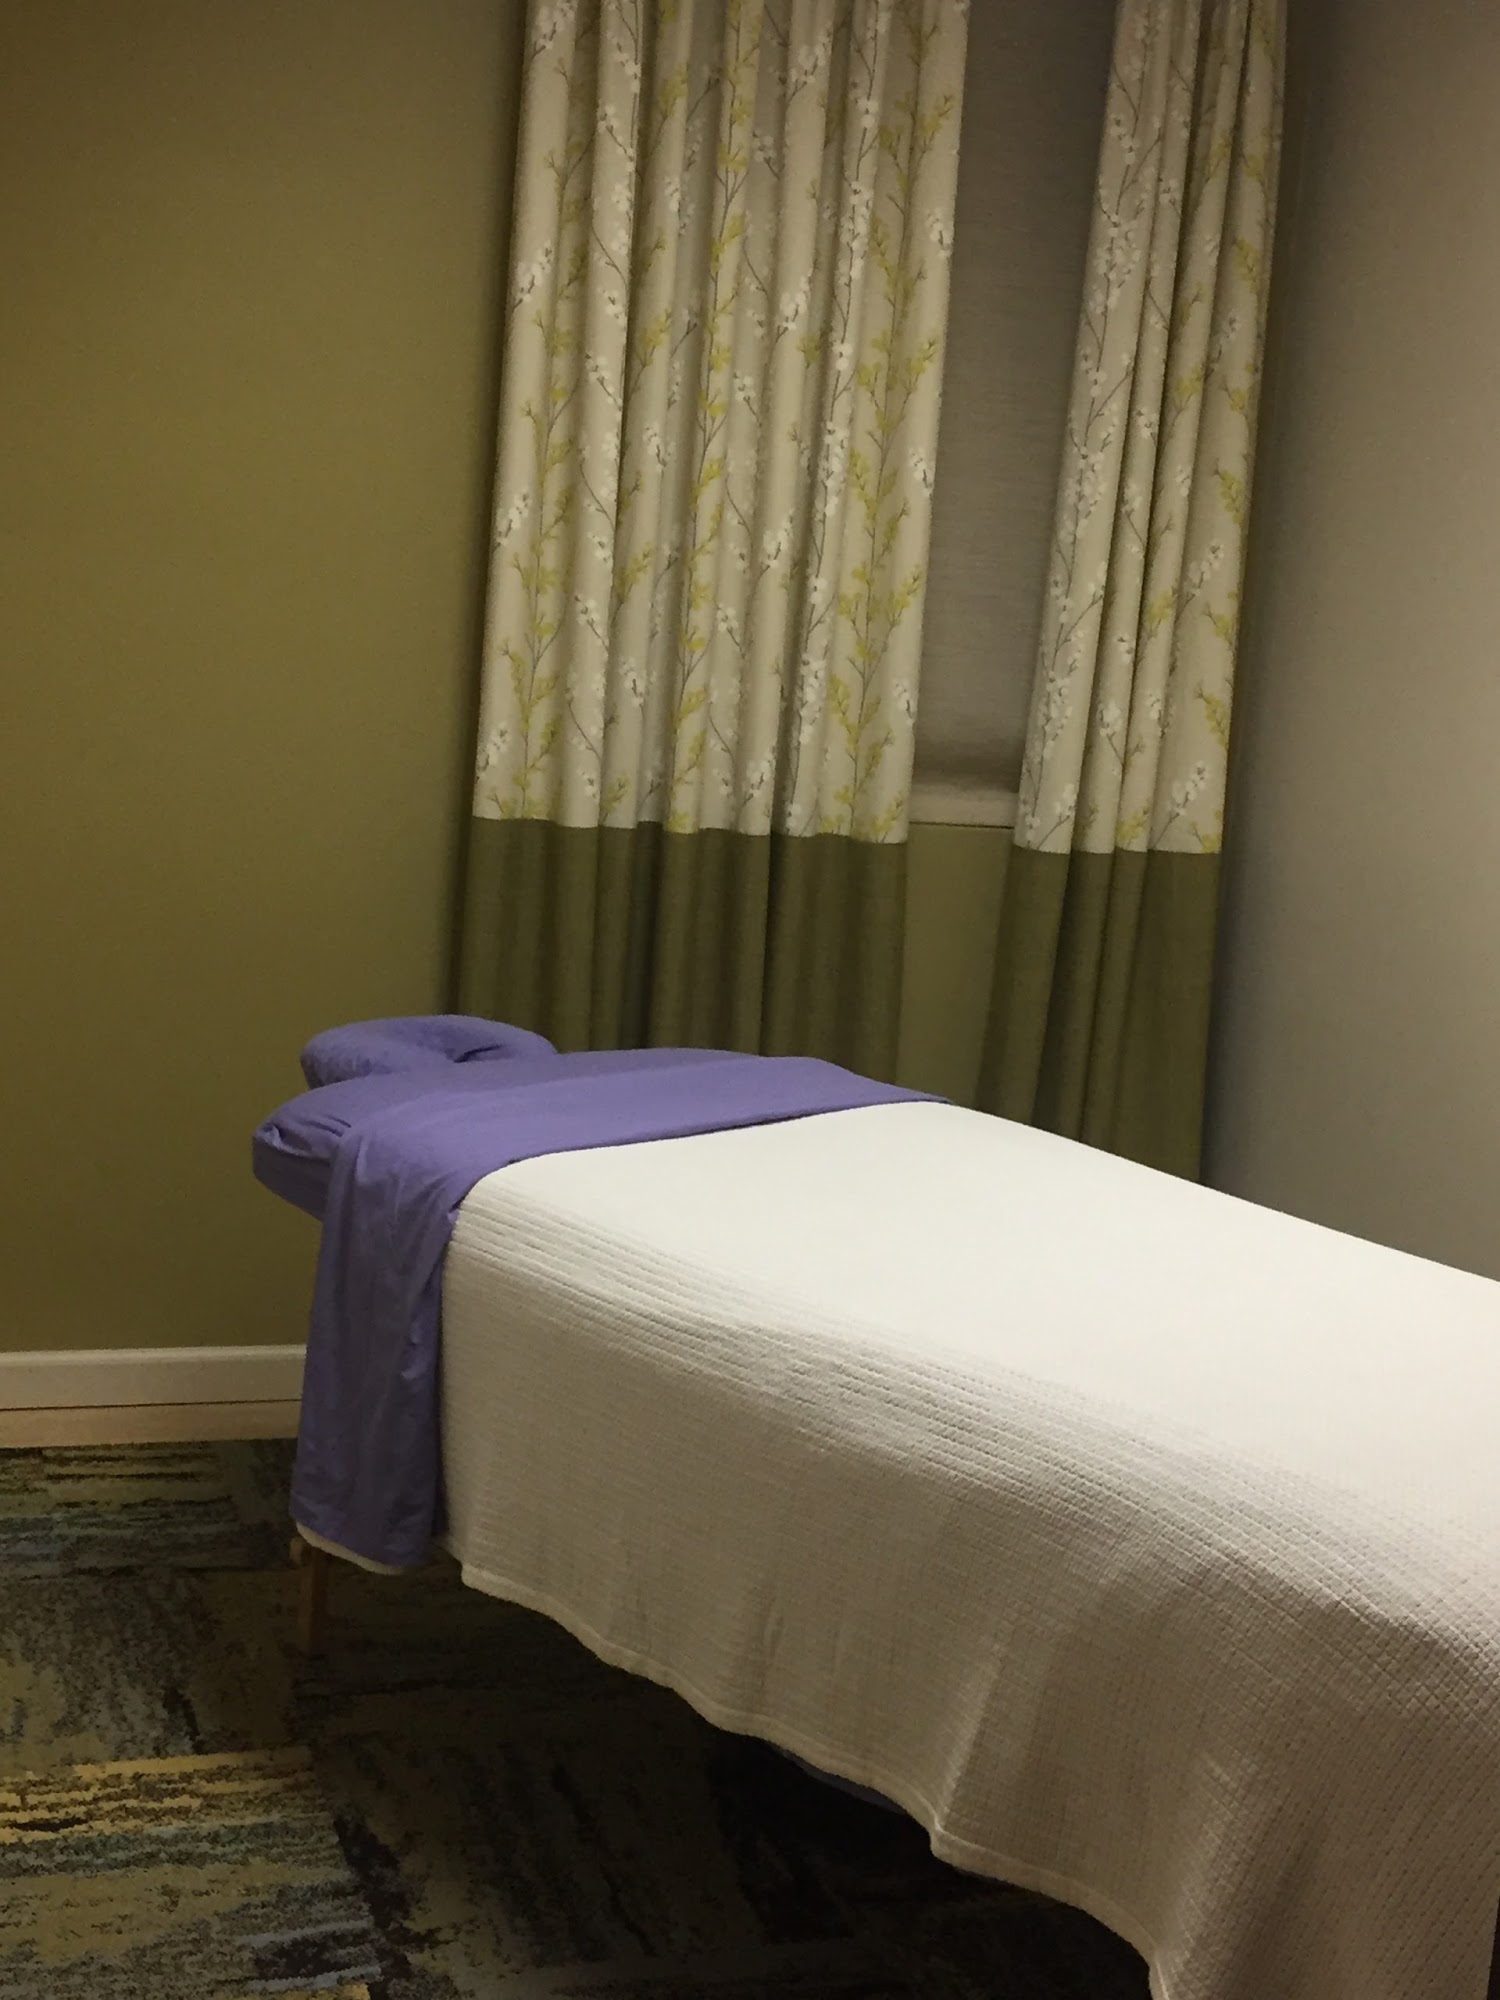 Mission Massage Therapy Center and Body Sculpting